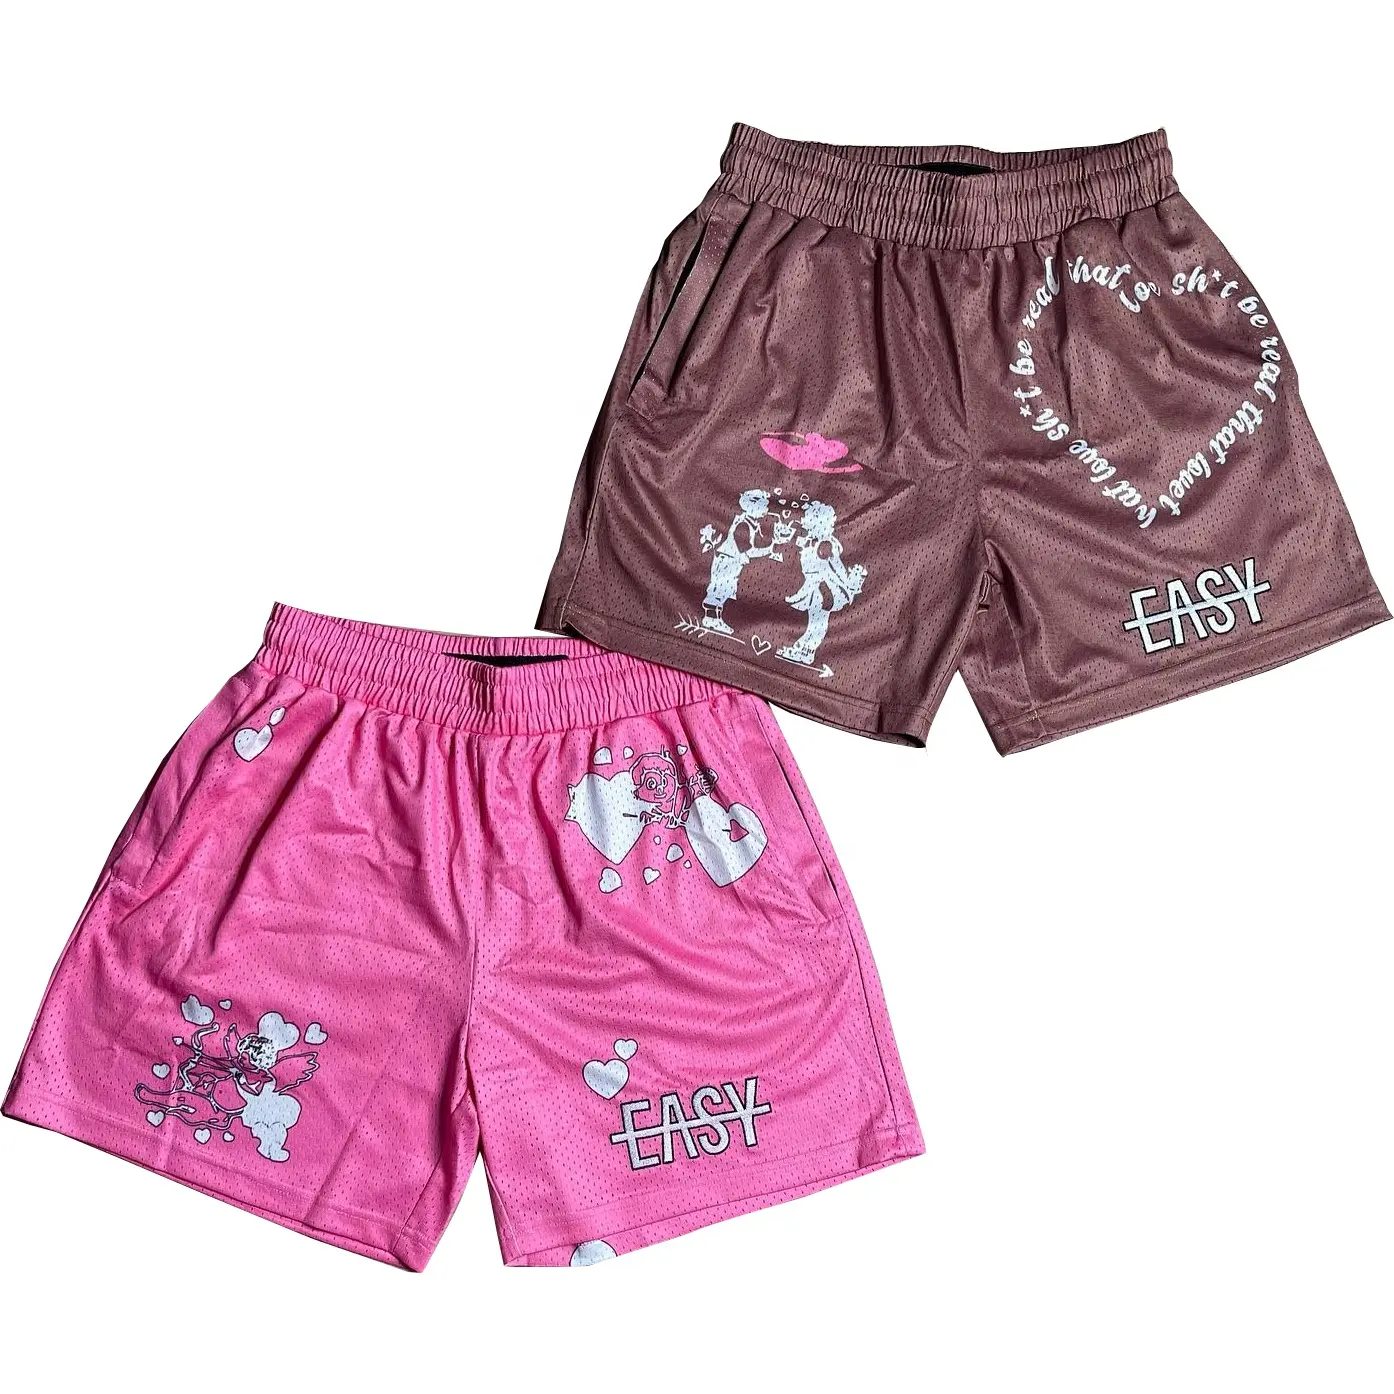 sublimated quick dry short with embroidery logo charater patches OEM running shorts printed pictures leisure gym